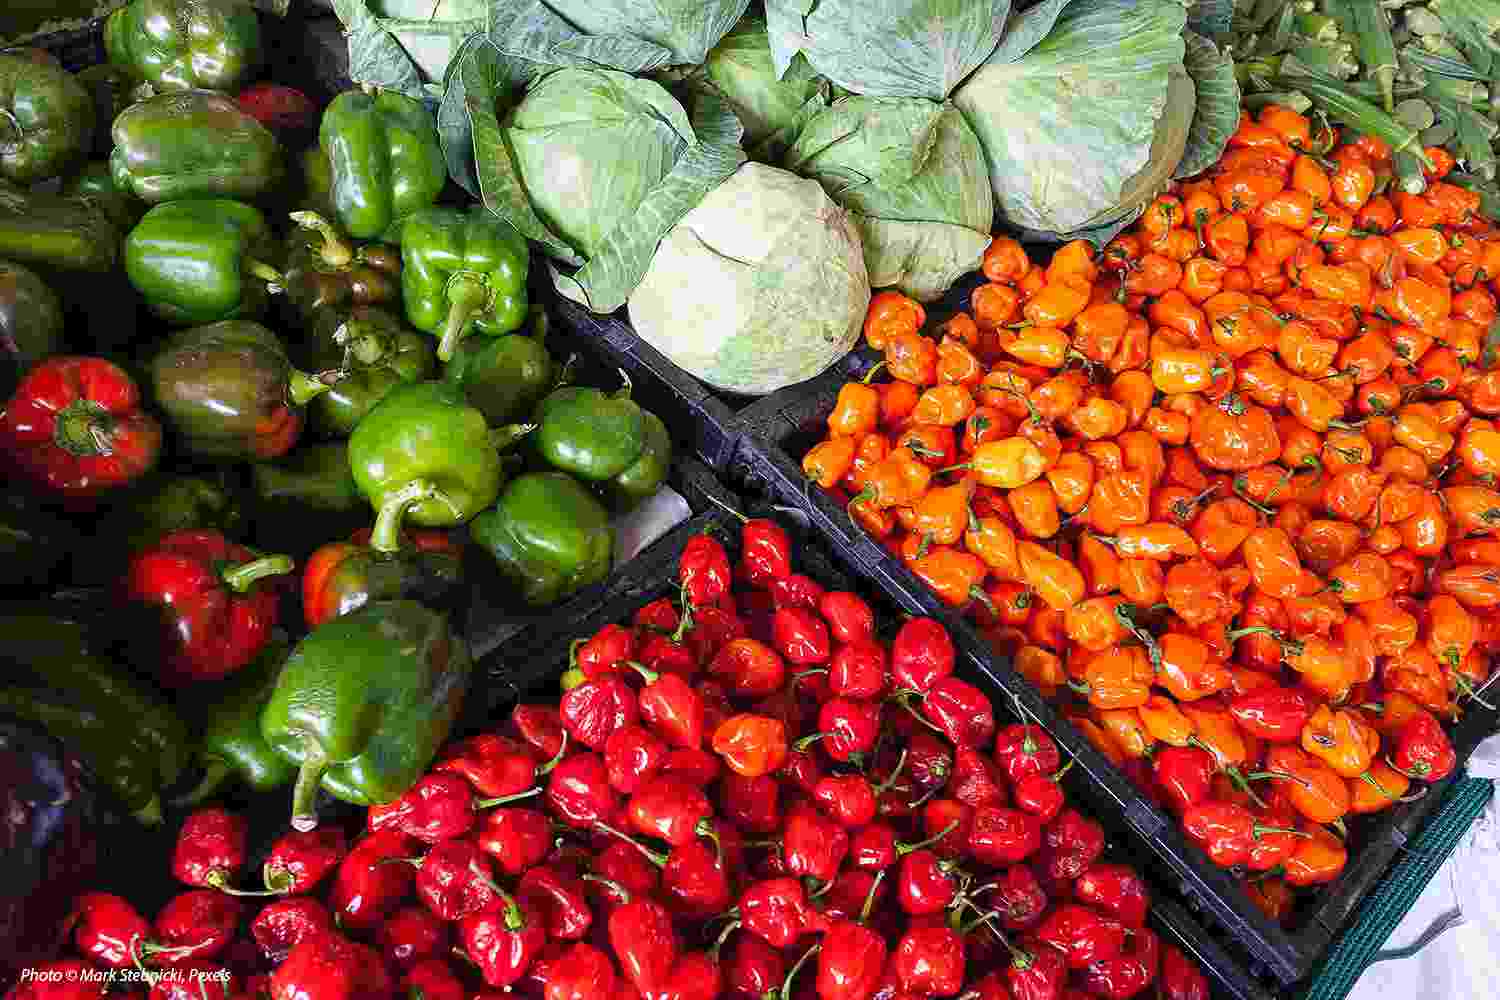 Close up of a selection of brightly coloured fruit and vegetables on a market stall